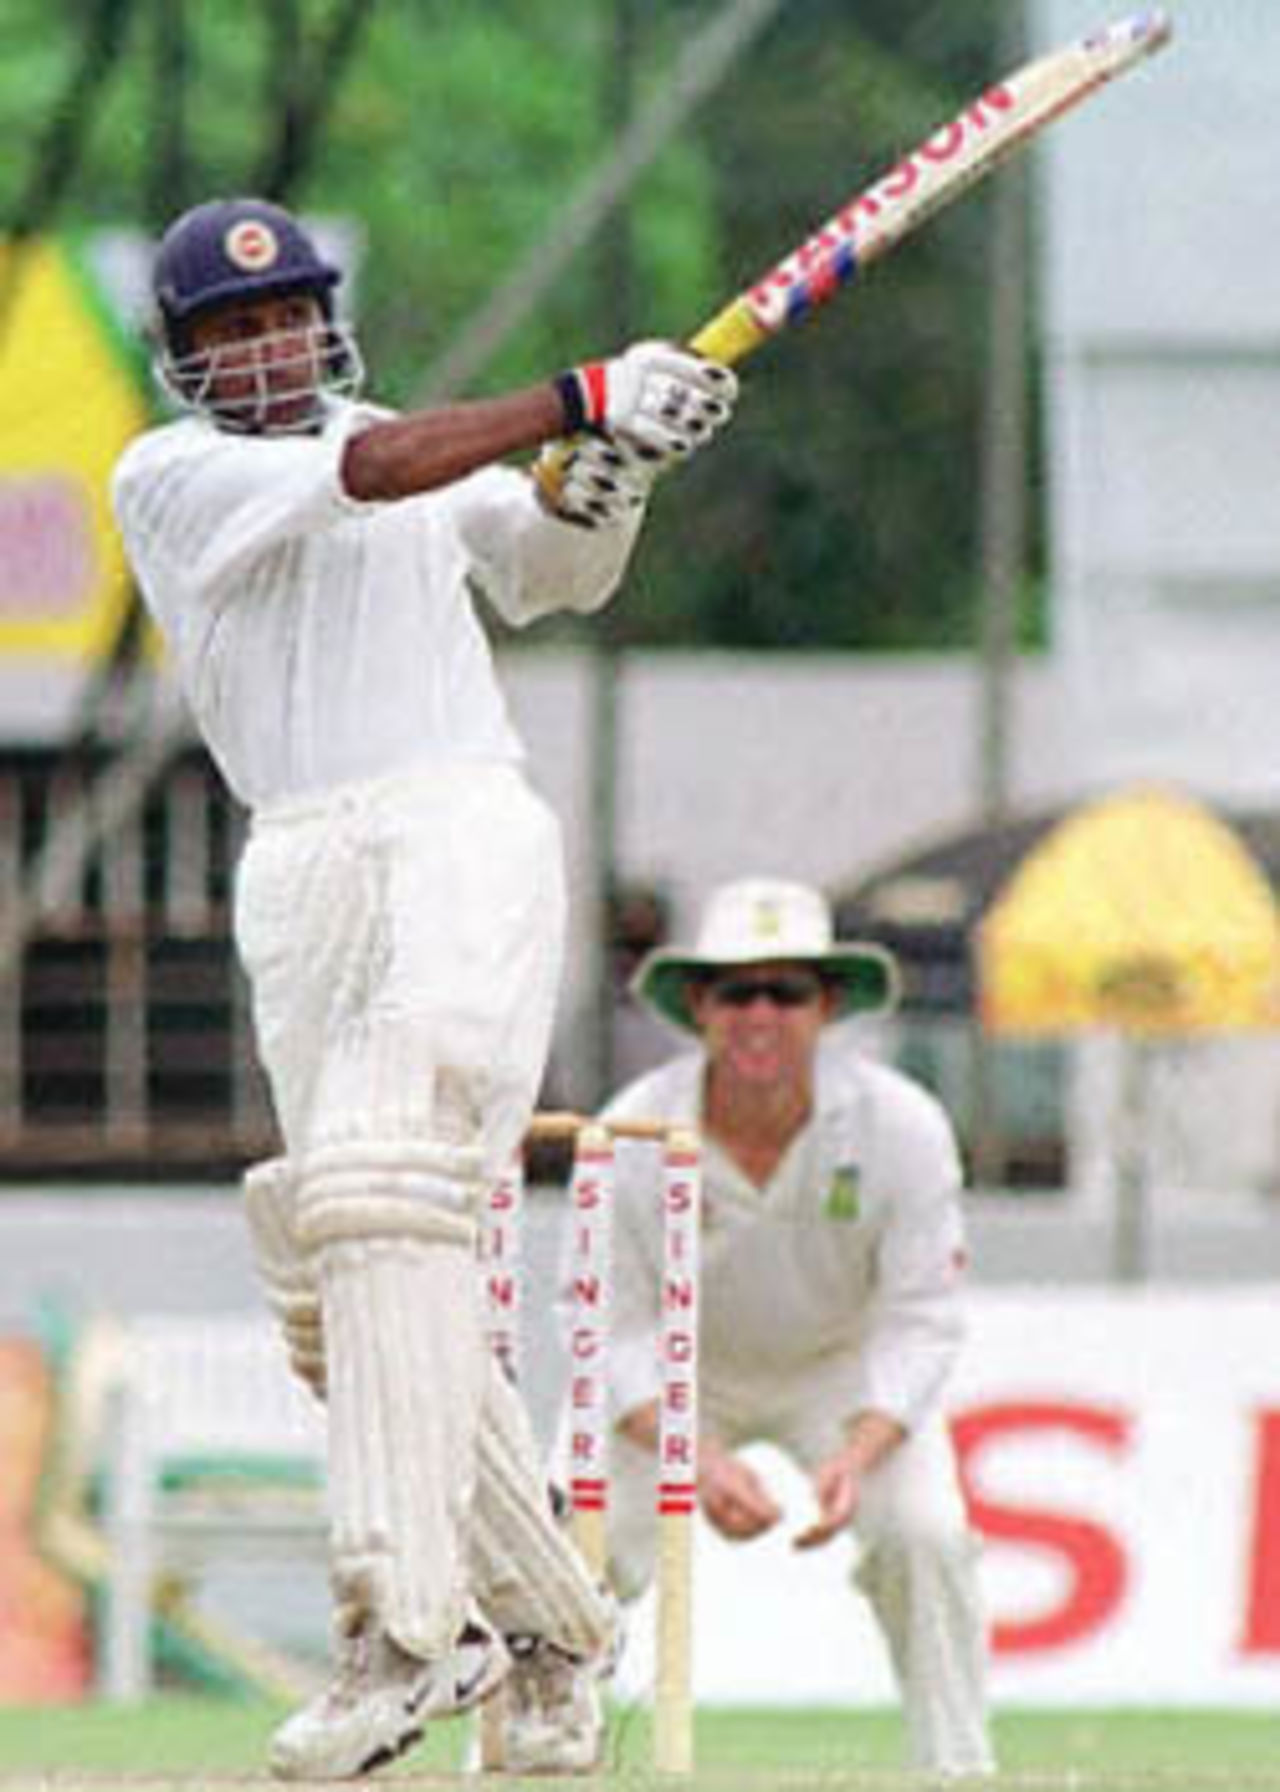 Sri Lankan batsman Mahela Jayewardene plays a stroke, in Kandy, during the third and final Test against South Africa. Jayewardene made 34 runs in the first innings. South Africa in Sri Lanka, 2000/01, 3rd Test, Sri Lanka v South Africa, Sinhalese Sports Club Ground, Colombo, 06-10 August 2000 (Day 3).